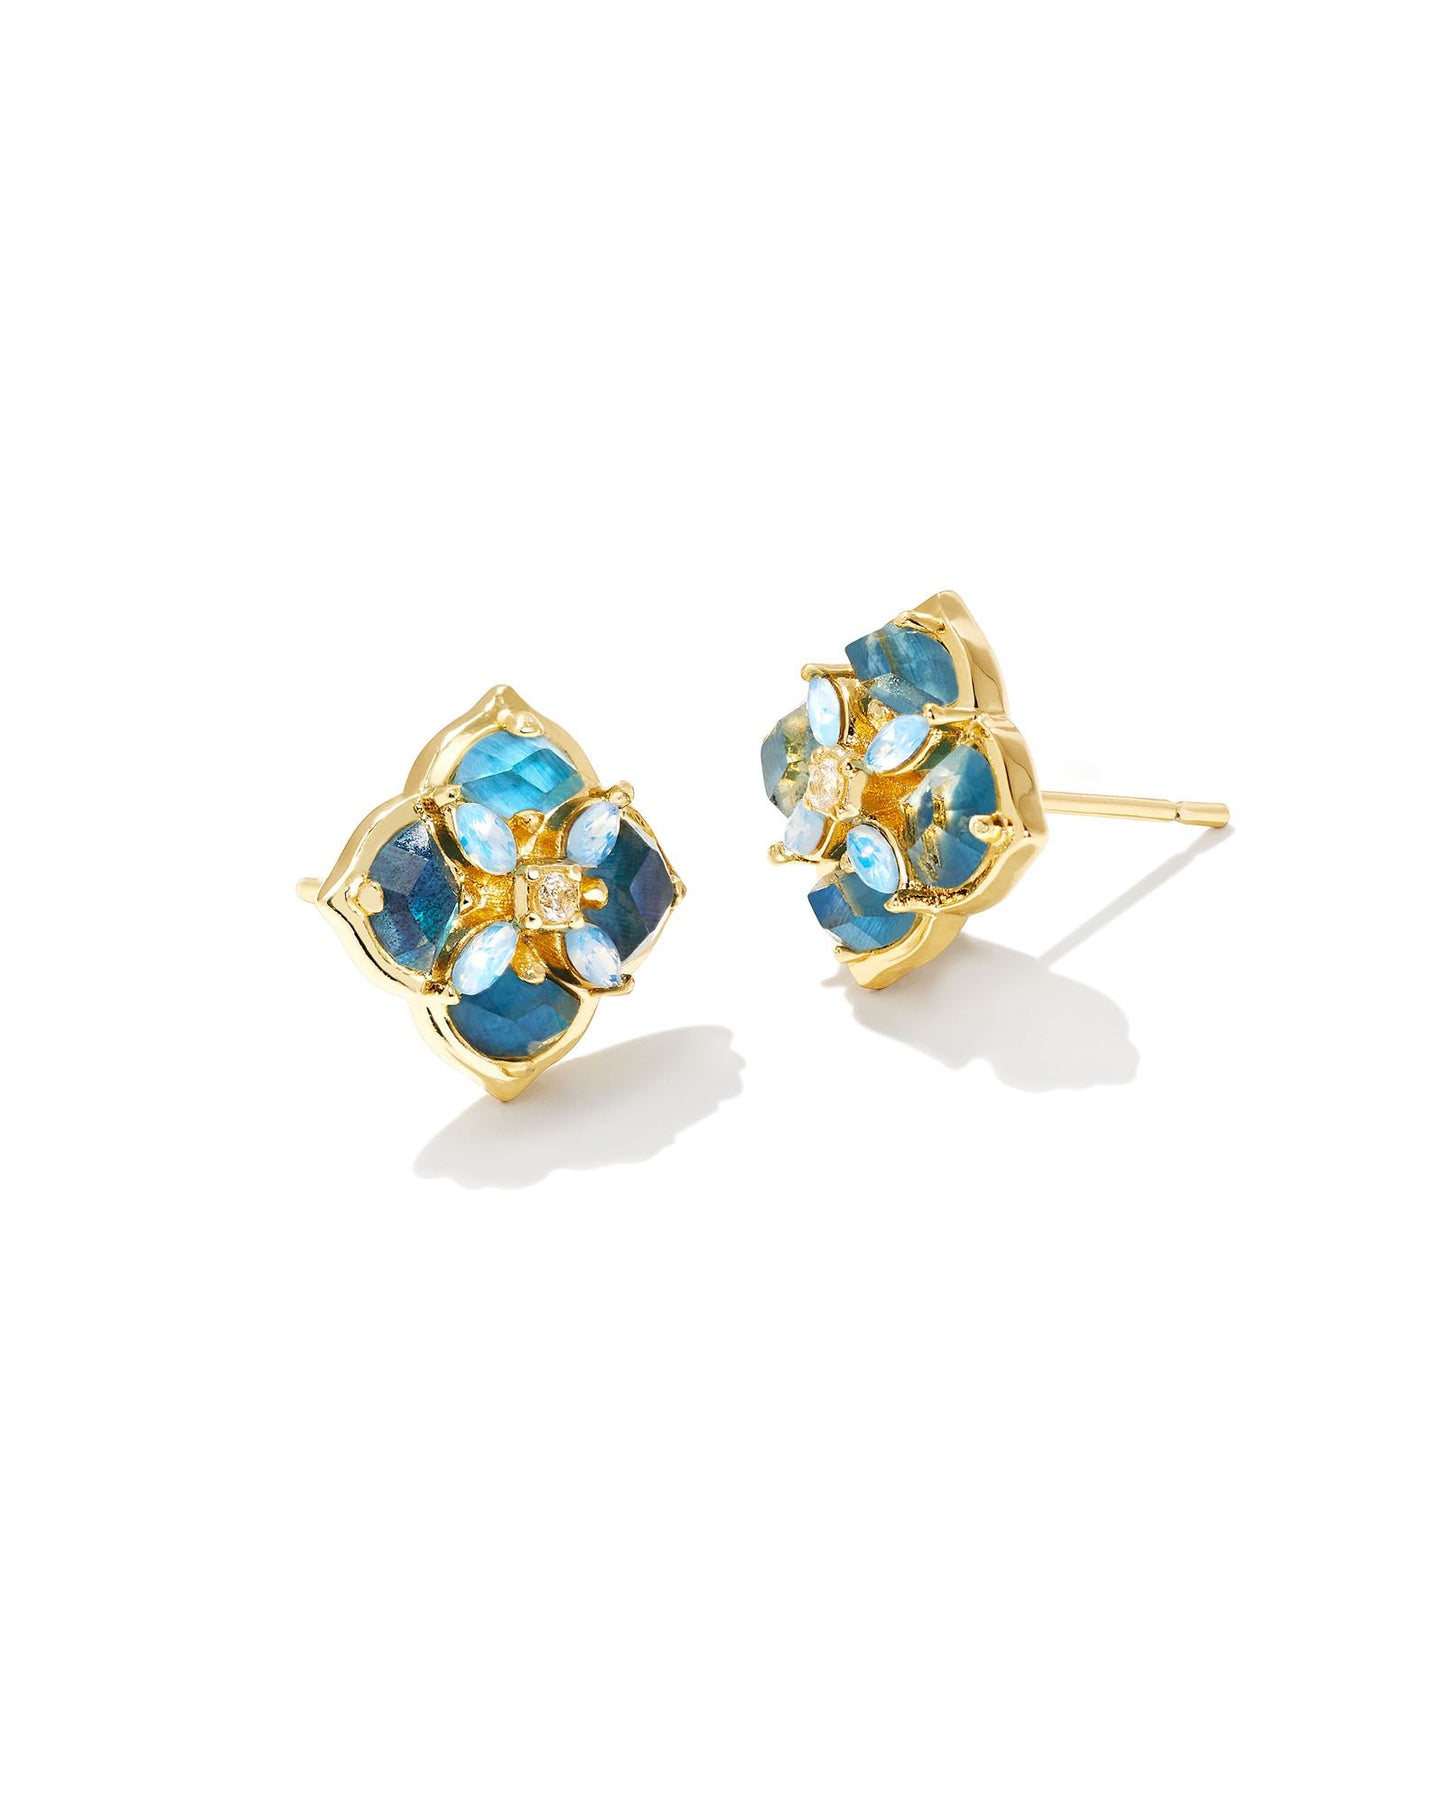 These stud earrings feature subtle stones and gems filled into our logo shape that are sure to lighten up any ensemble. The metal is 24K Gold plated over brass with blue mix stones.